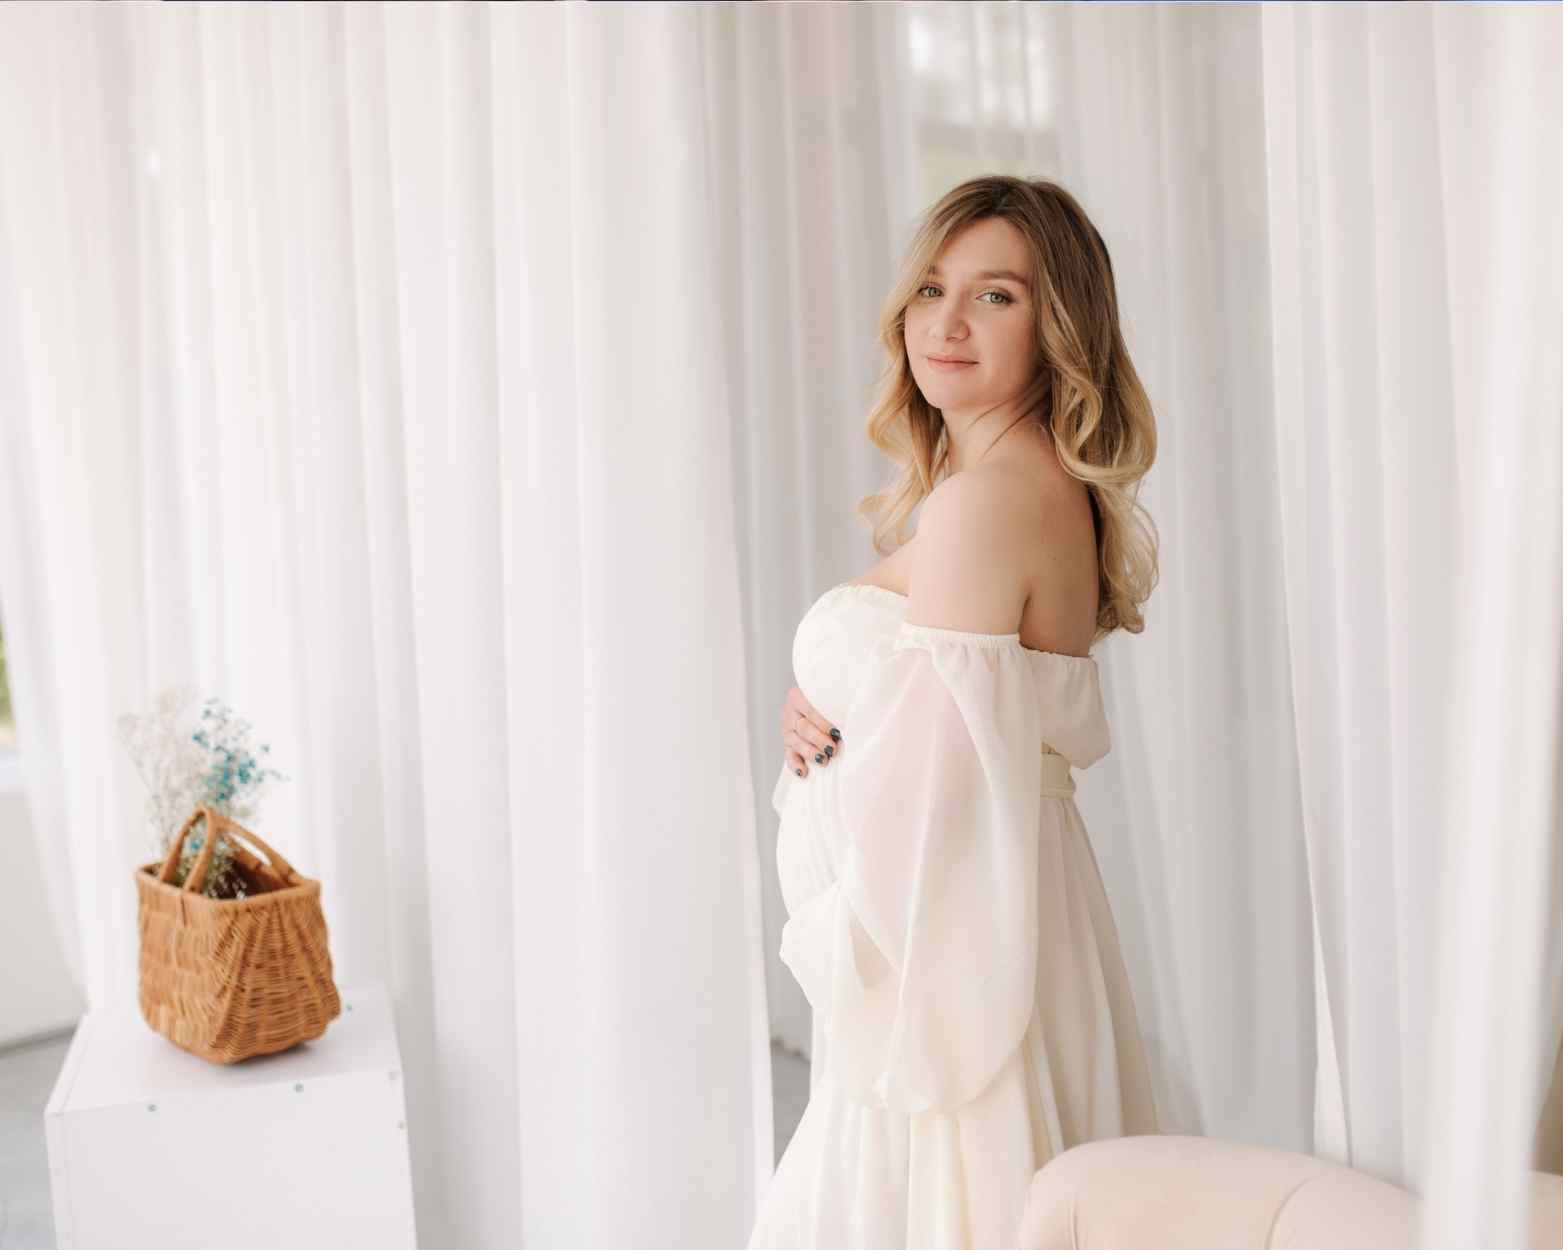 A woman having her maternity photoshoot with a gorgeous white flowy maternity dress.